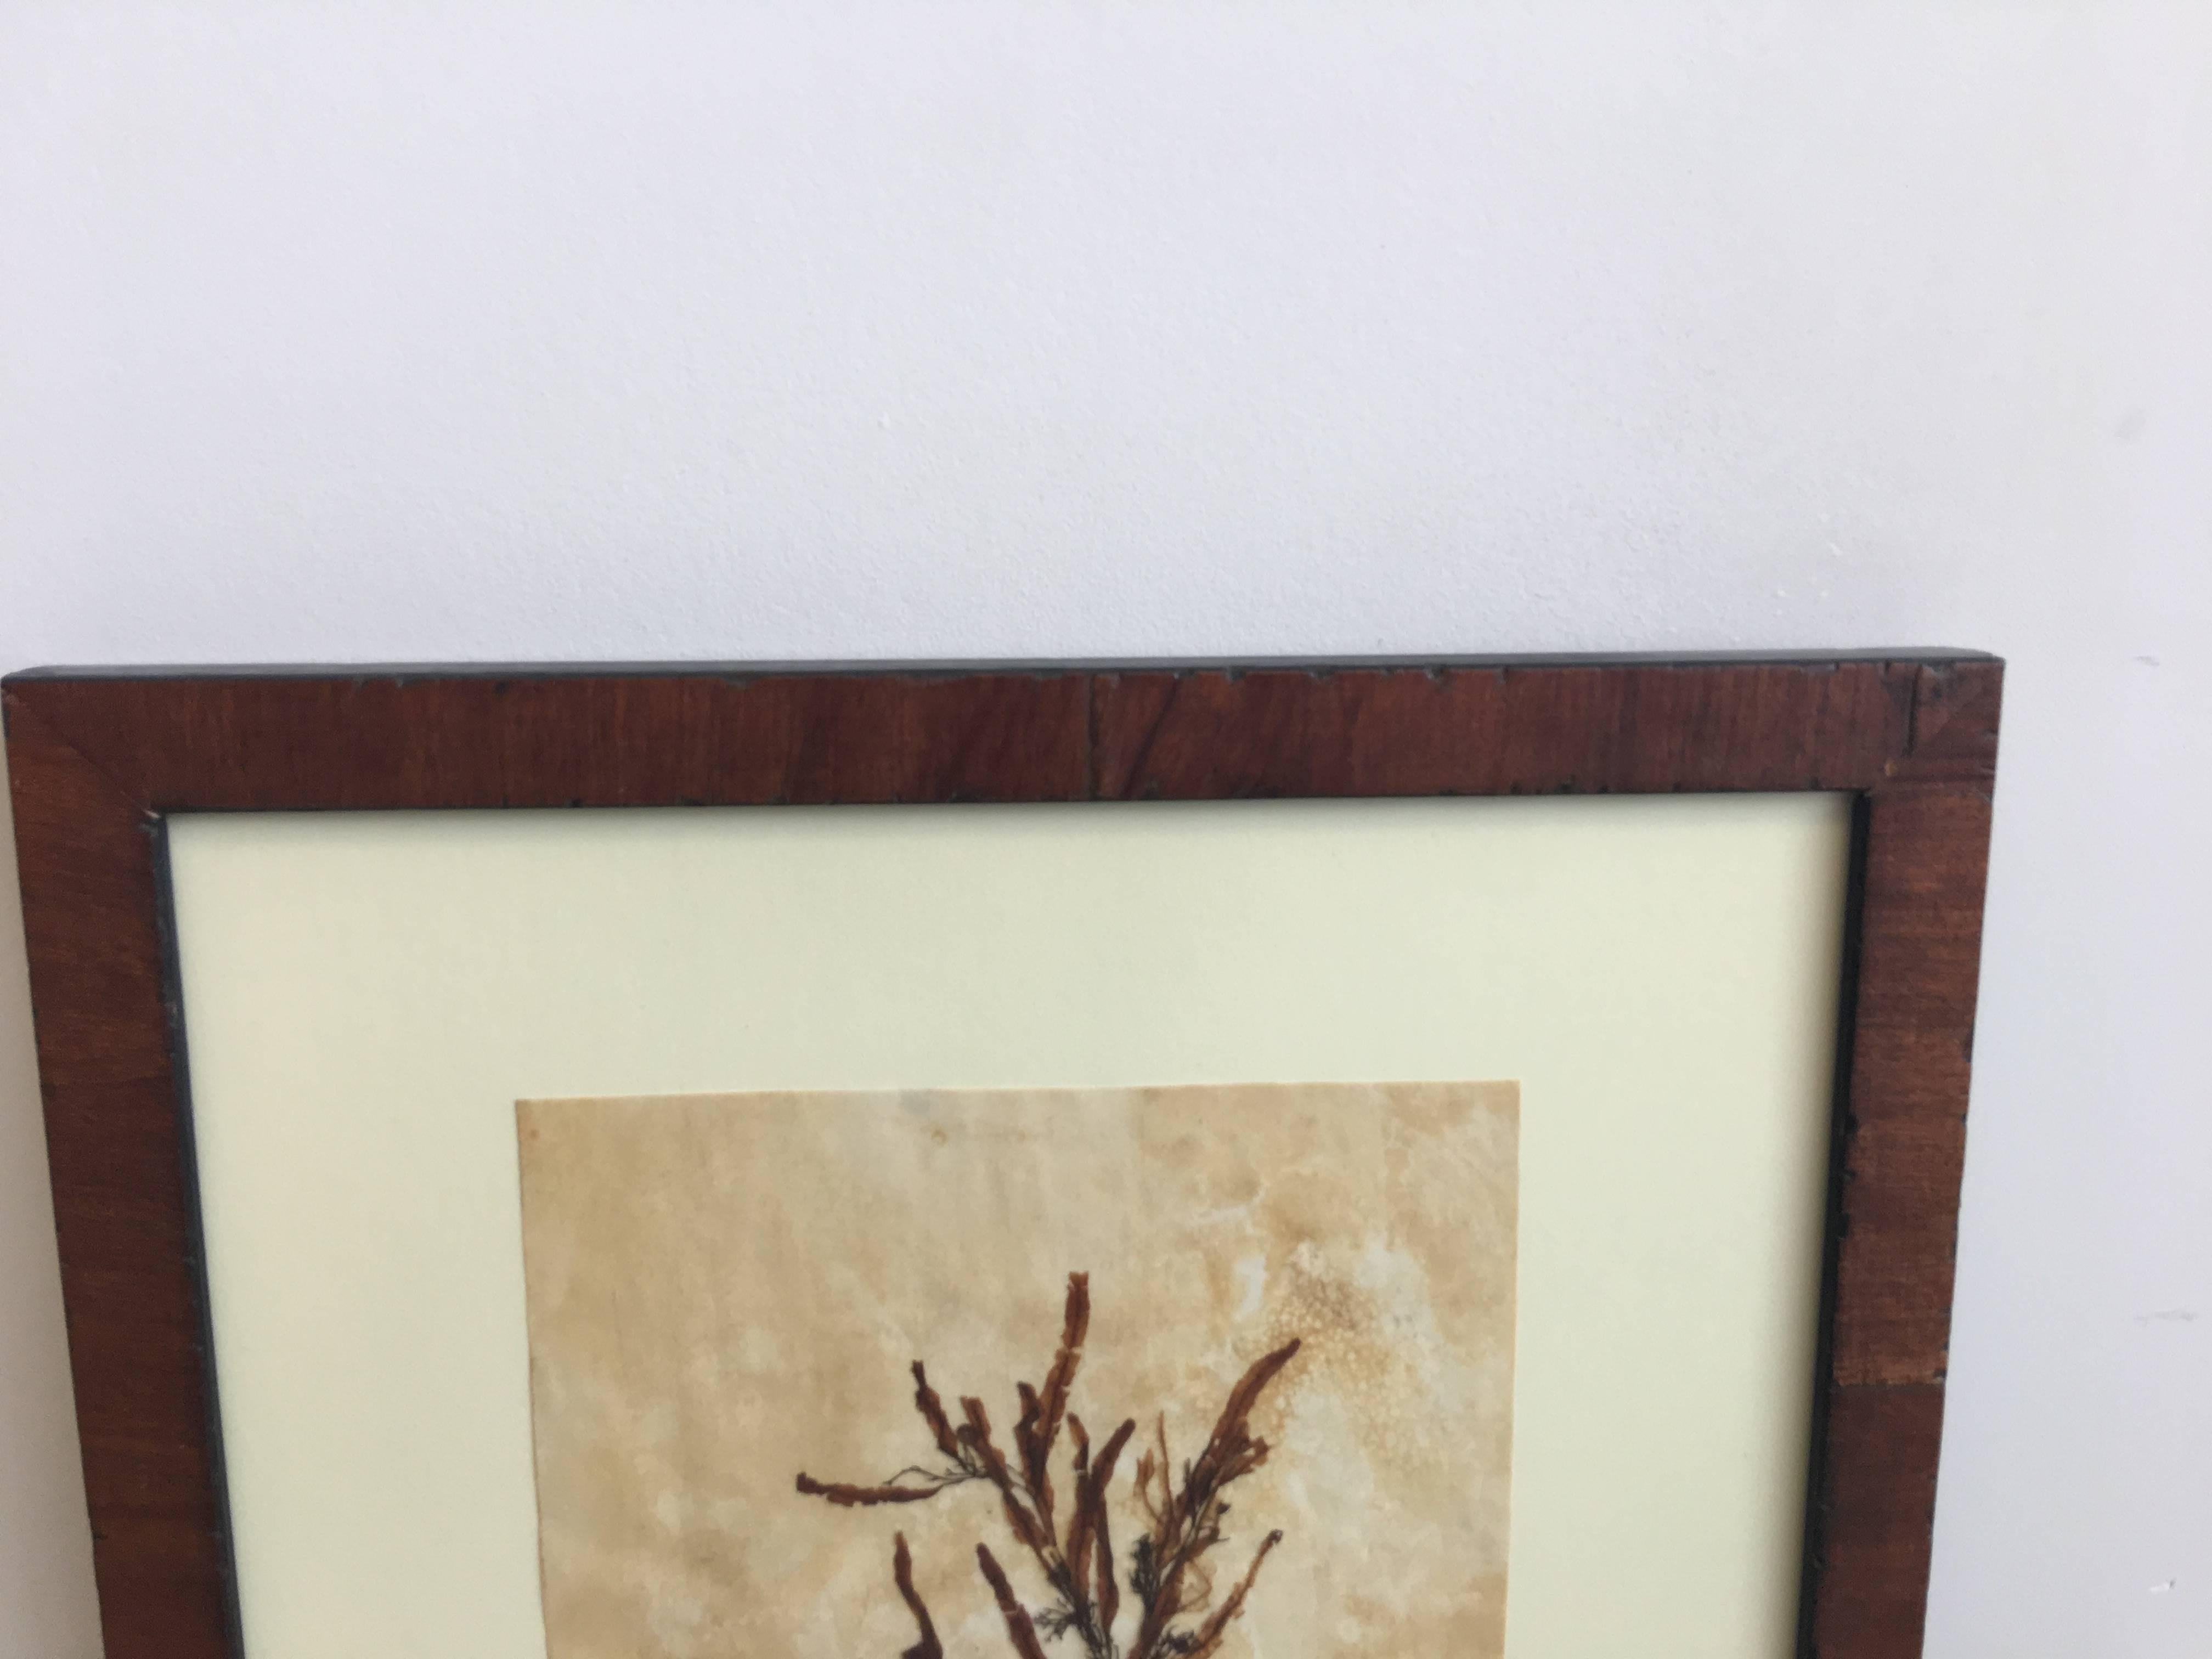 Fantastic pressed natural red seaweed by Richmond, Virginia botanical artist Anne Blackwell Thompson of Blackwell Botanicals. The seaweed is affixed to a tinted acid free paper and is matted and displayed in a rustic walnut finish wooden frame.